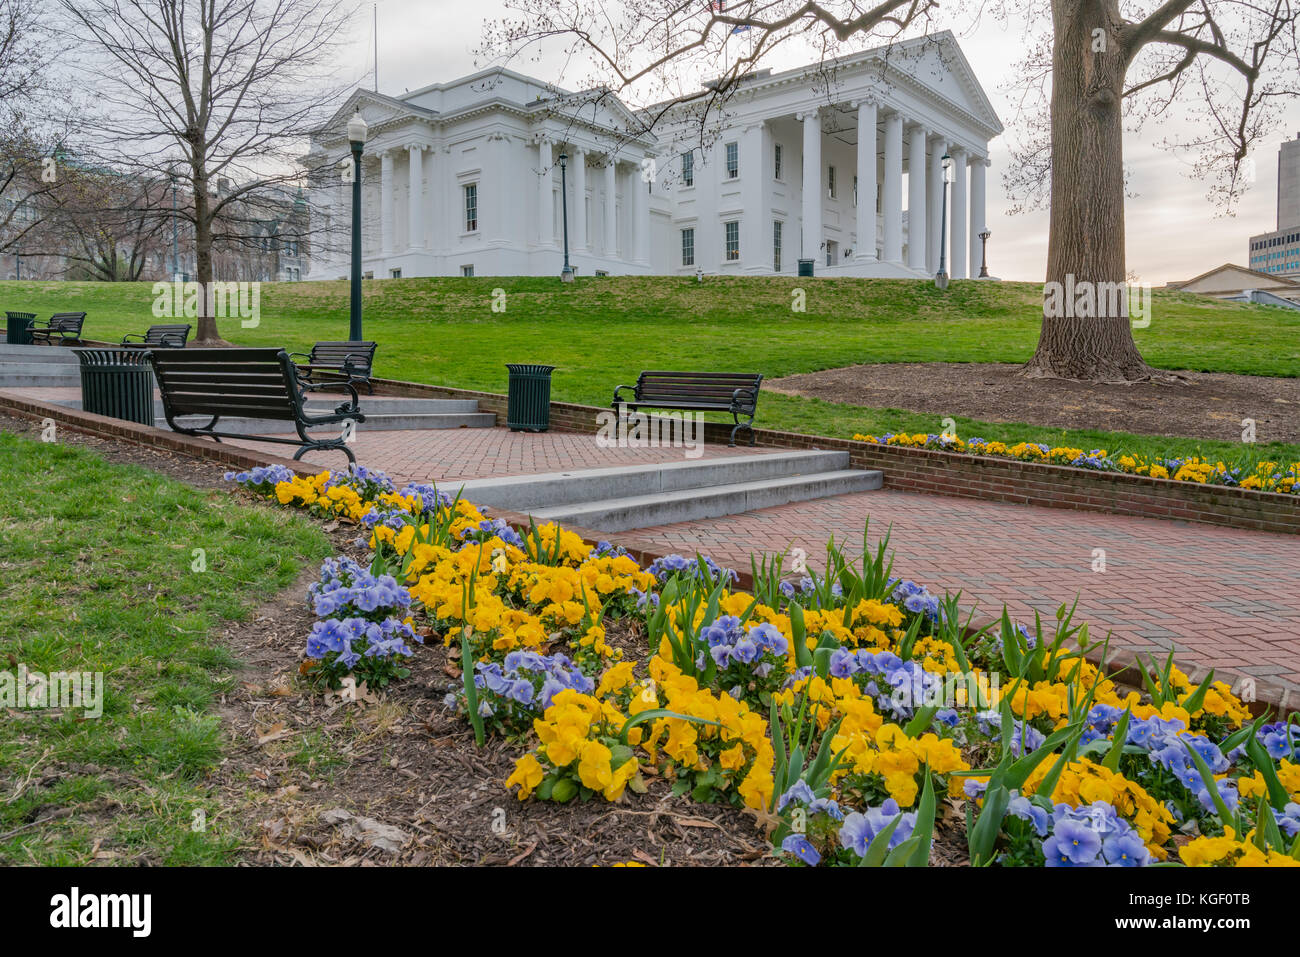 Morning at the Virginia state capitol building in Richmond with flowers. Stock Photo